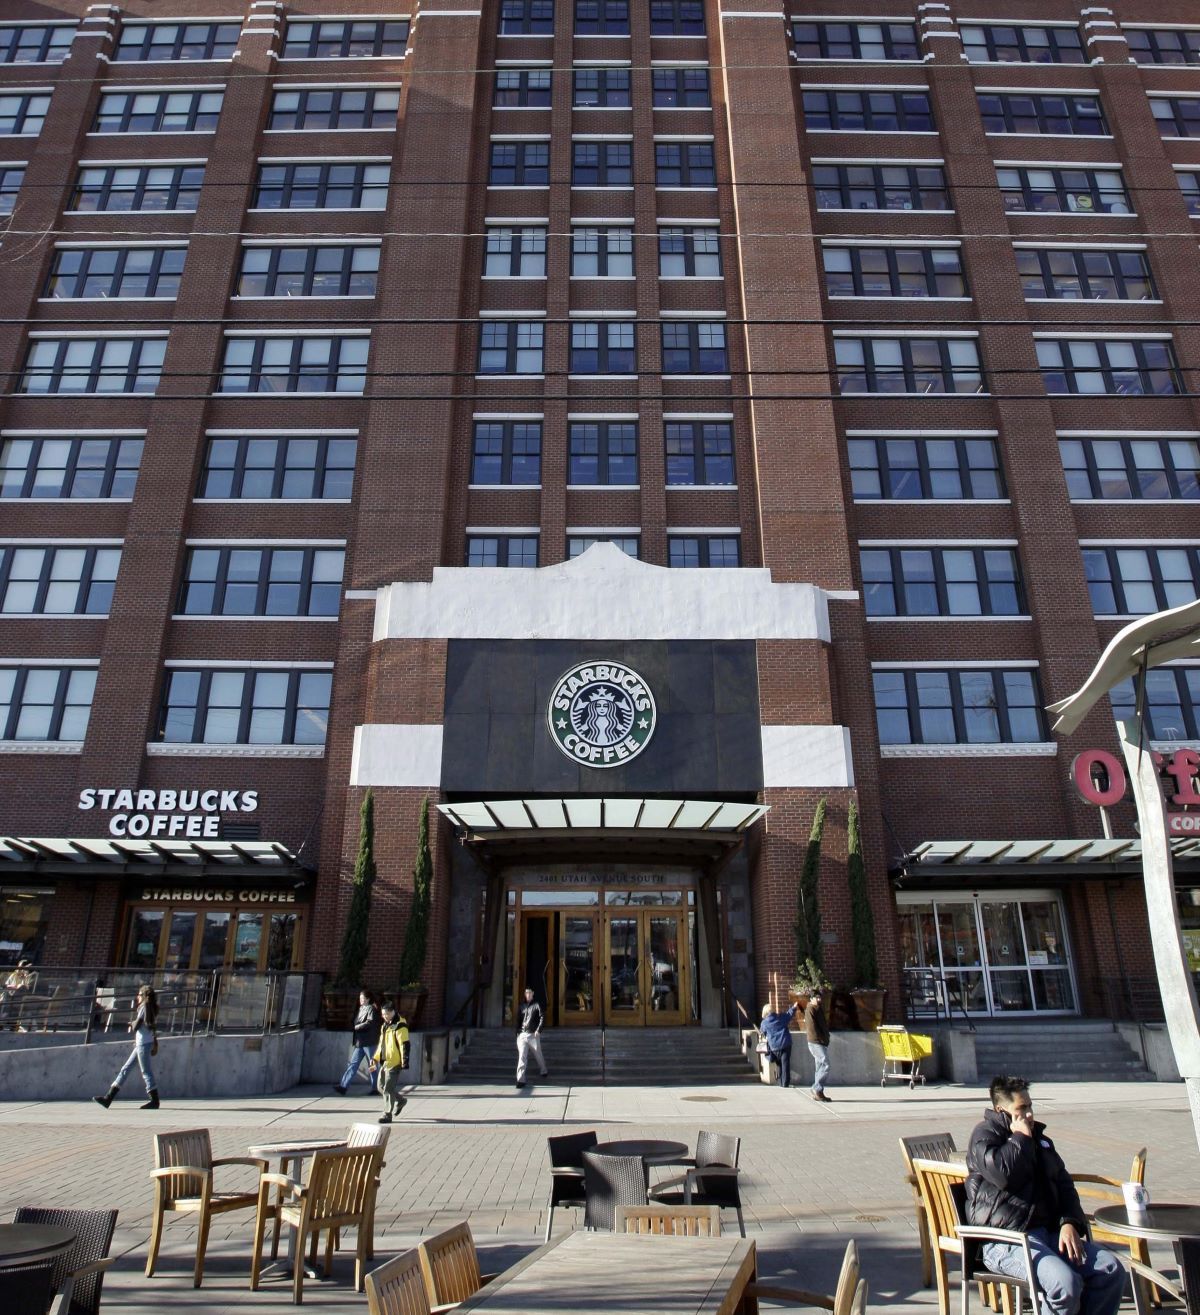 The facade of a brown brick building with rows of paned windows and the Starbucks Coffee logo above the front entrance.